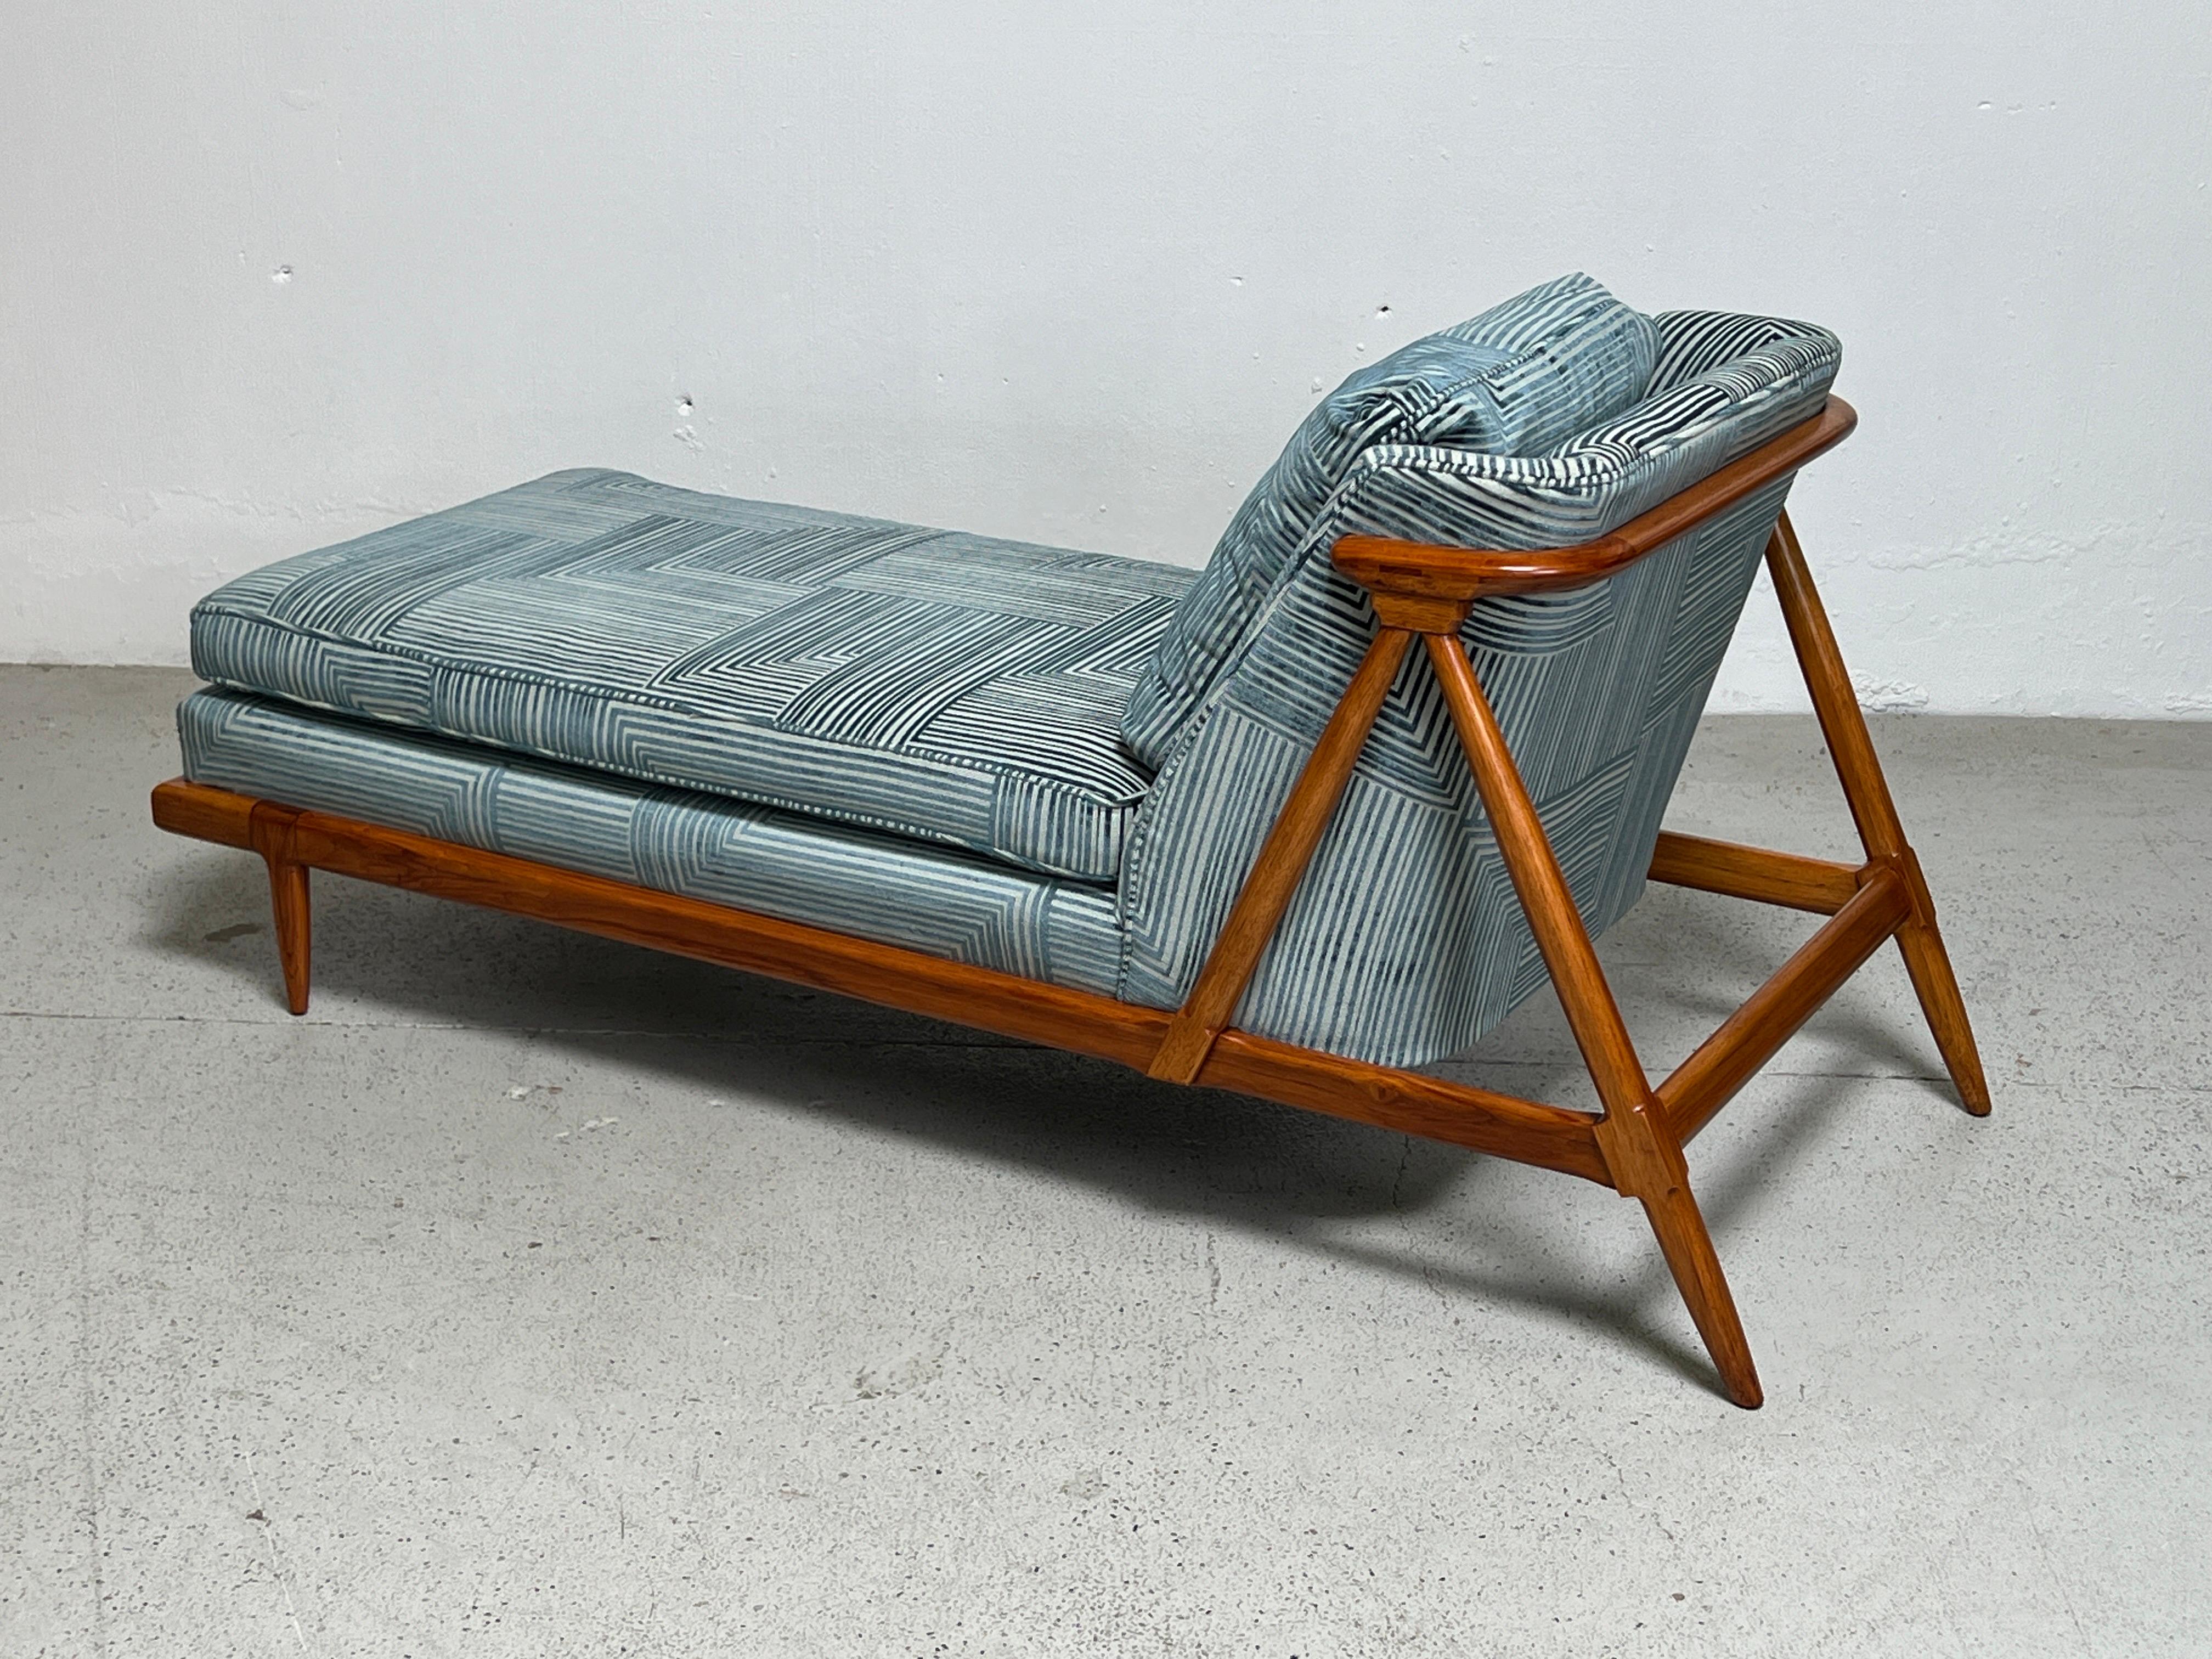 A Rare chaise lounge designed by John Lubberts and Lambert Mulder for Tomlinson. Beautifully restored. 